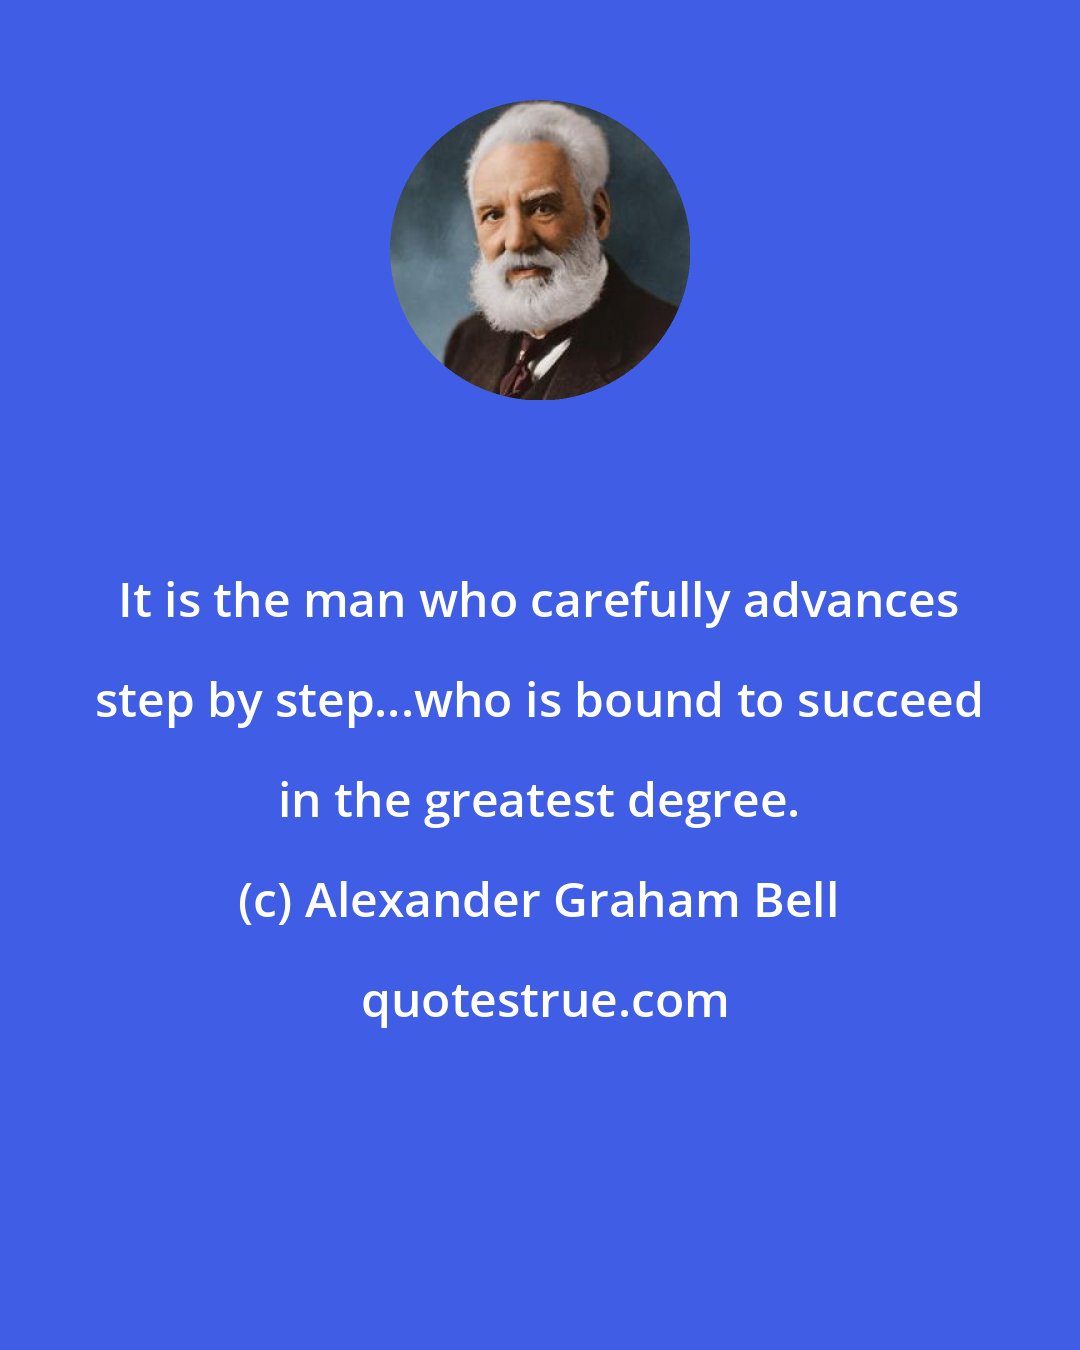 Alexander Graham Bell: It is the man who carefully advances step by step...who is bound to succeed in the greatest degree.